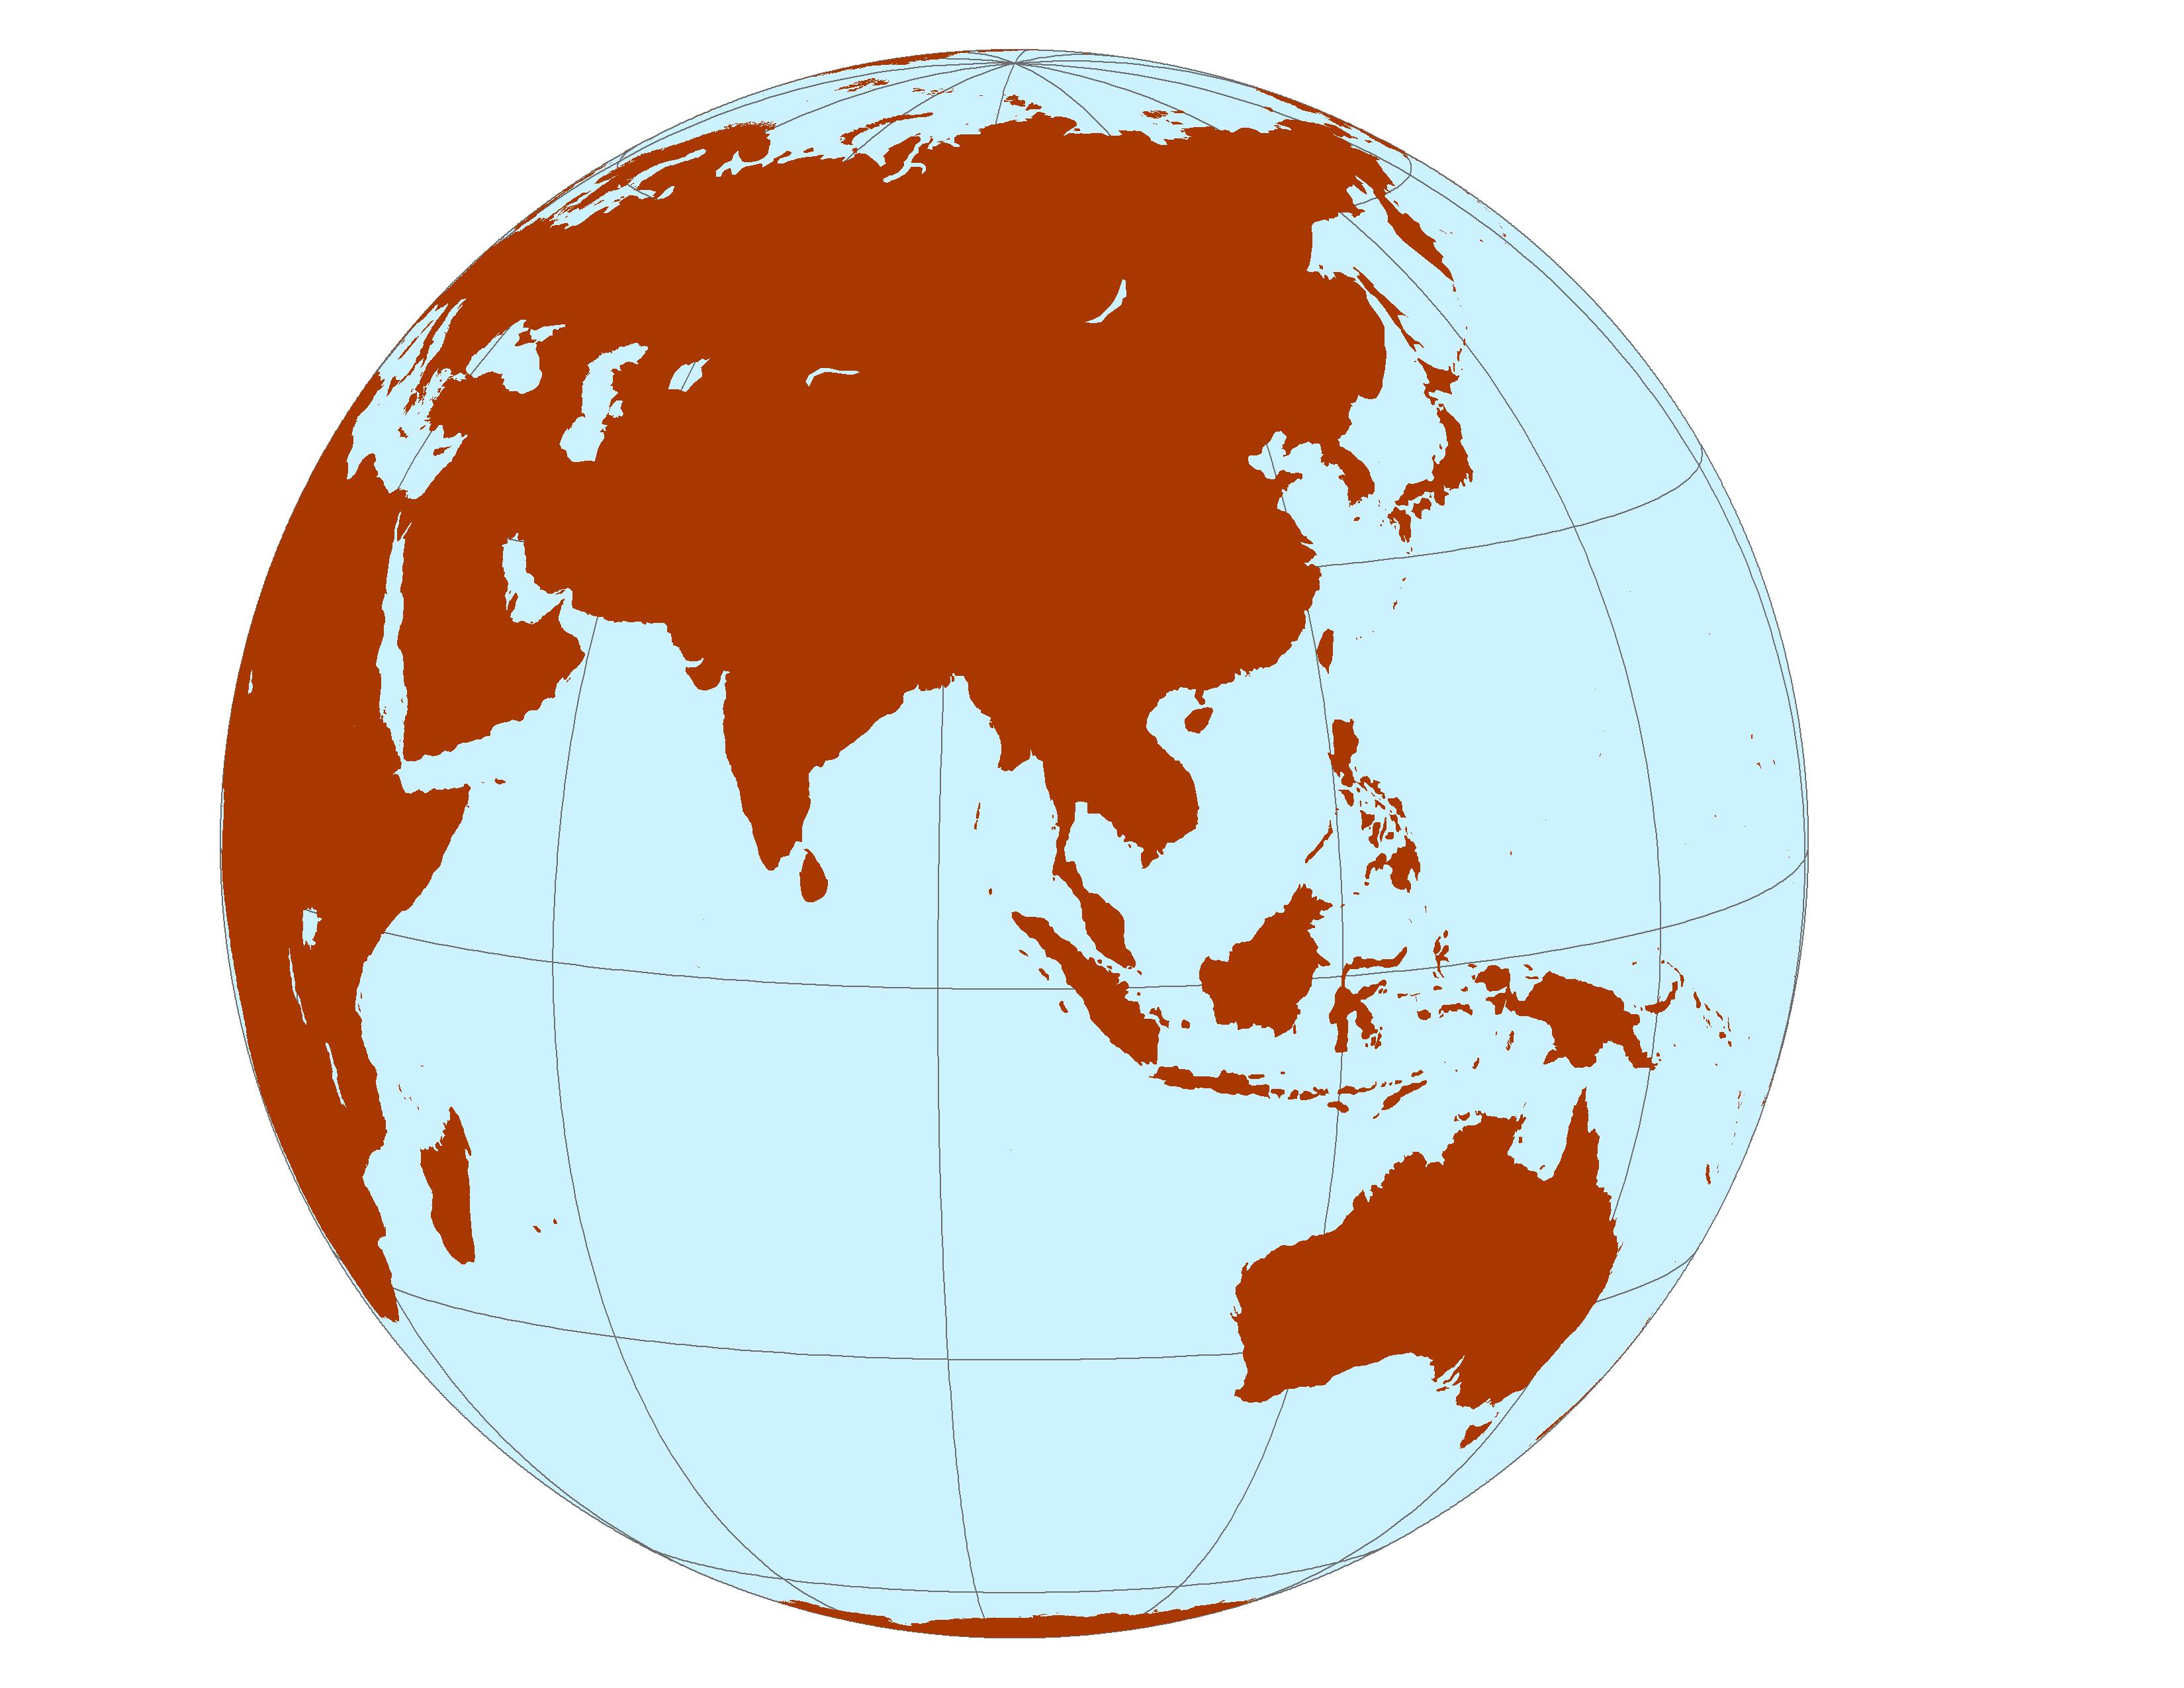 View of Asia on a Globe